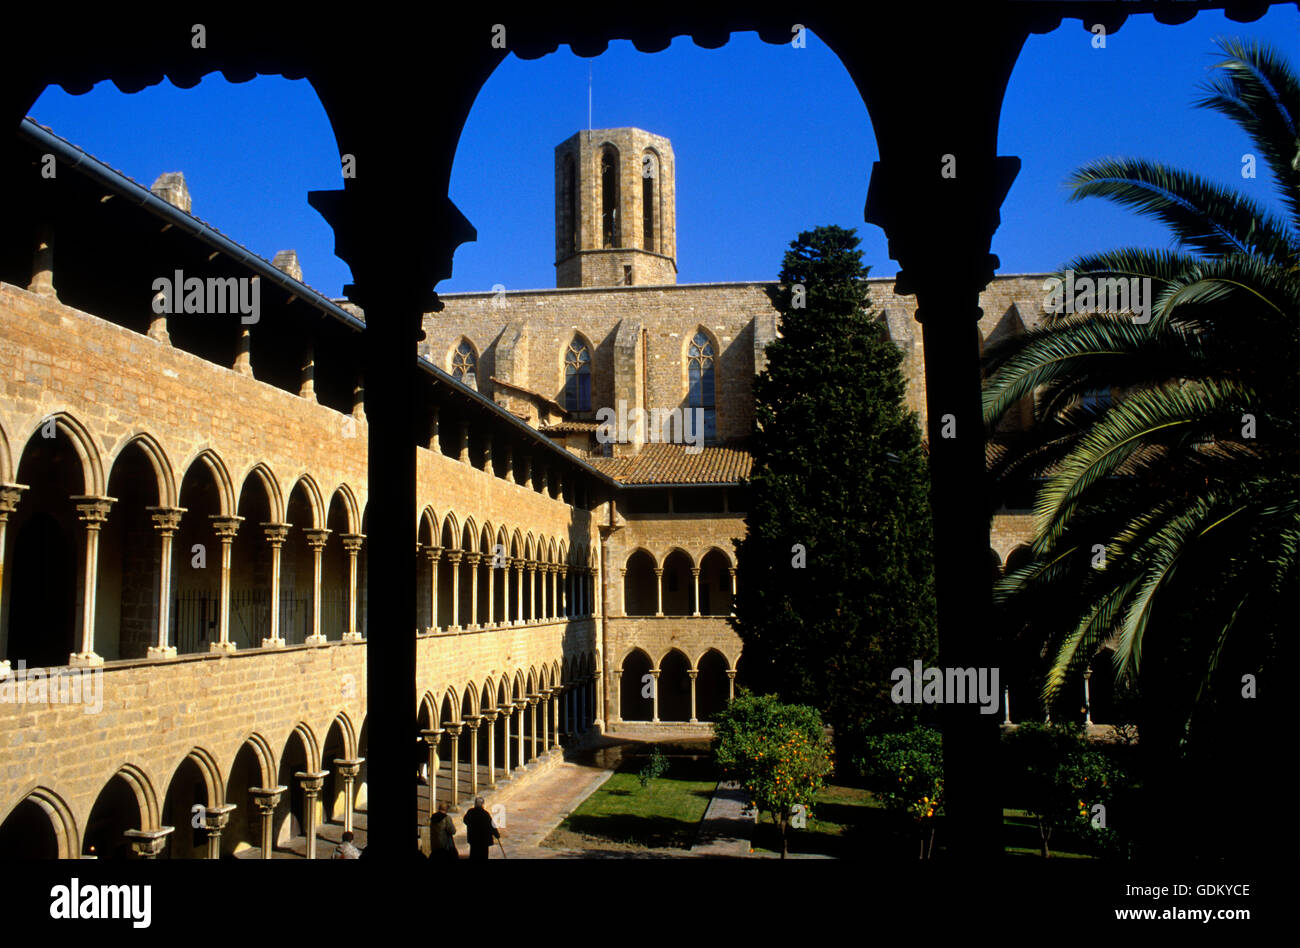 monastery of Pedralbes.Gothic style. 14th century, Barcelona, Spain Stock Photo